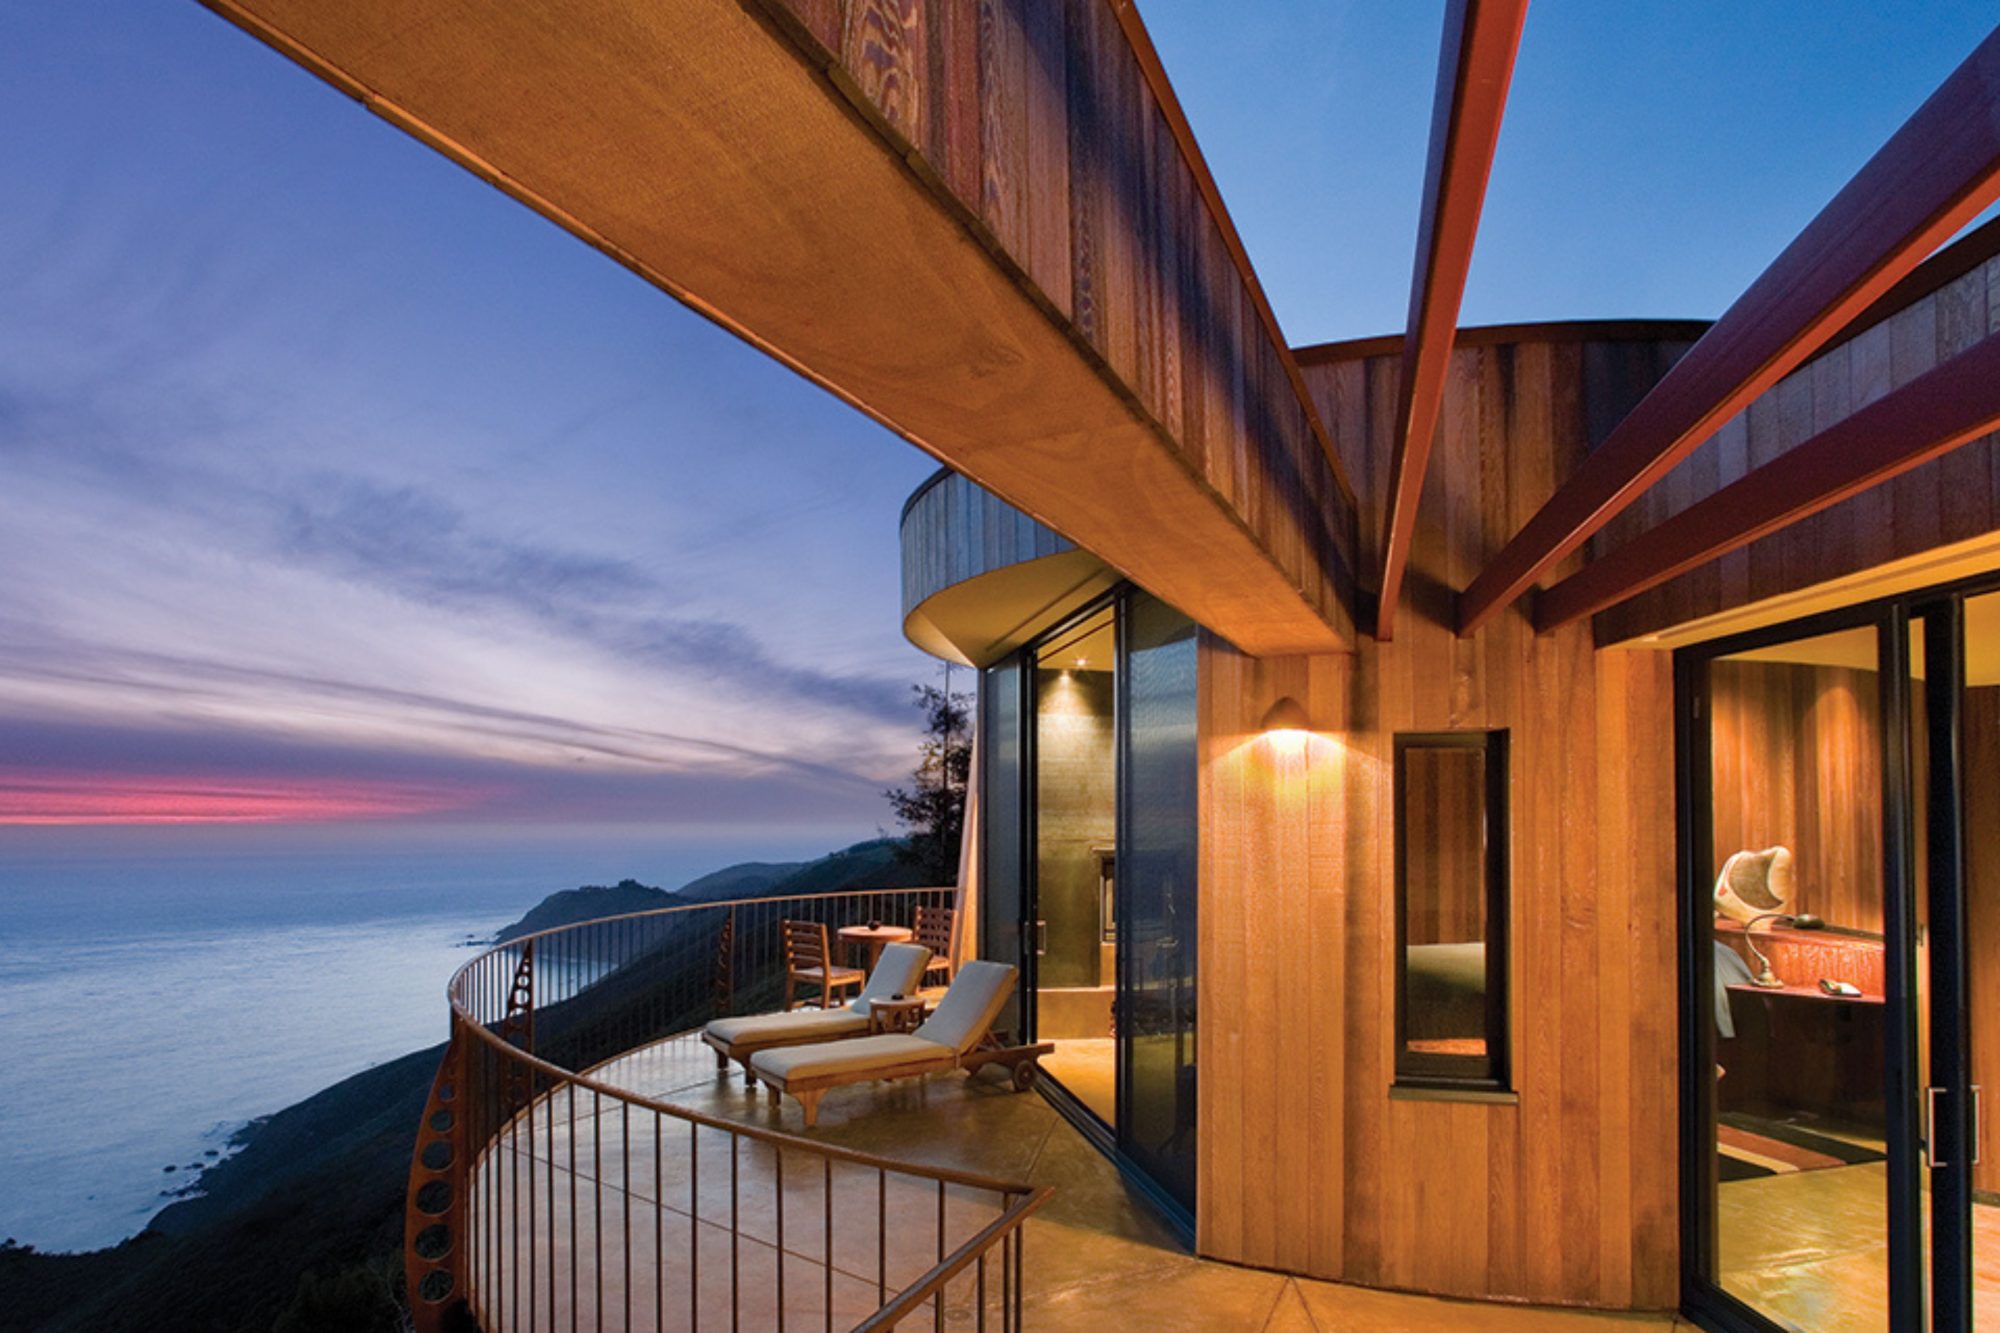 Big Sur’s Post Ranch Inn is an intimate escape above the Pacific